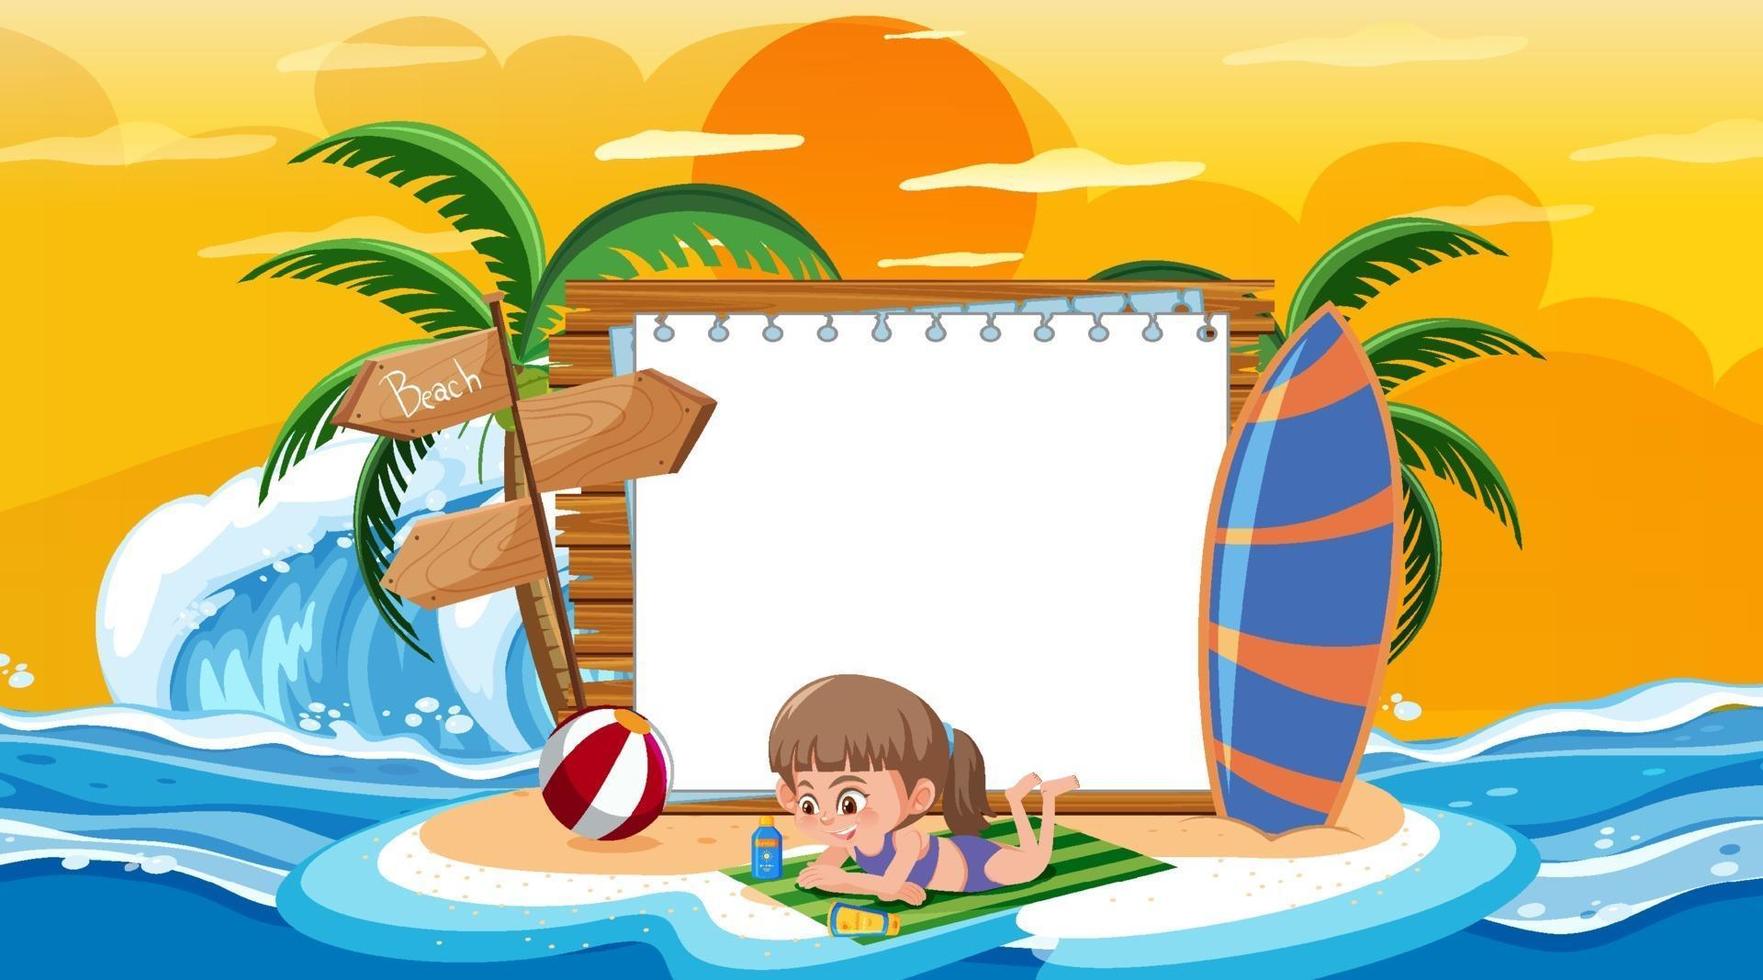 Empty banner template with kids on vacation at the beach sunset scene vector